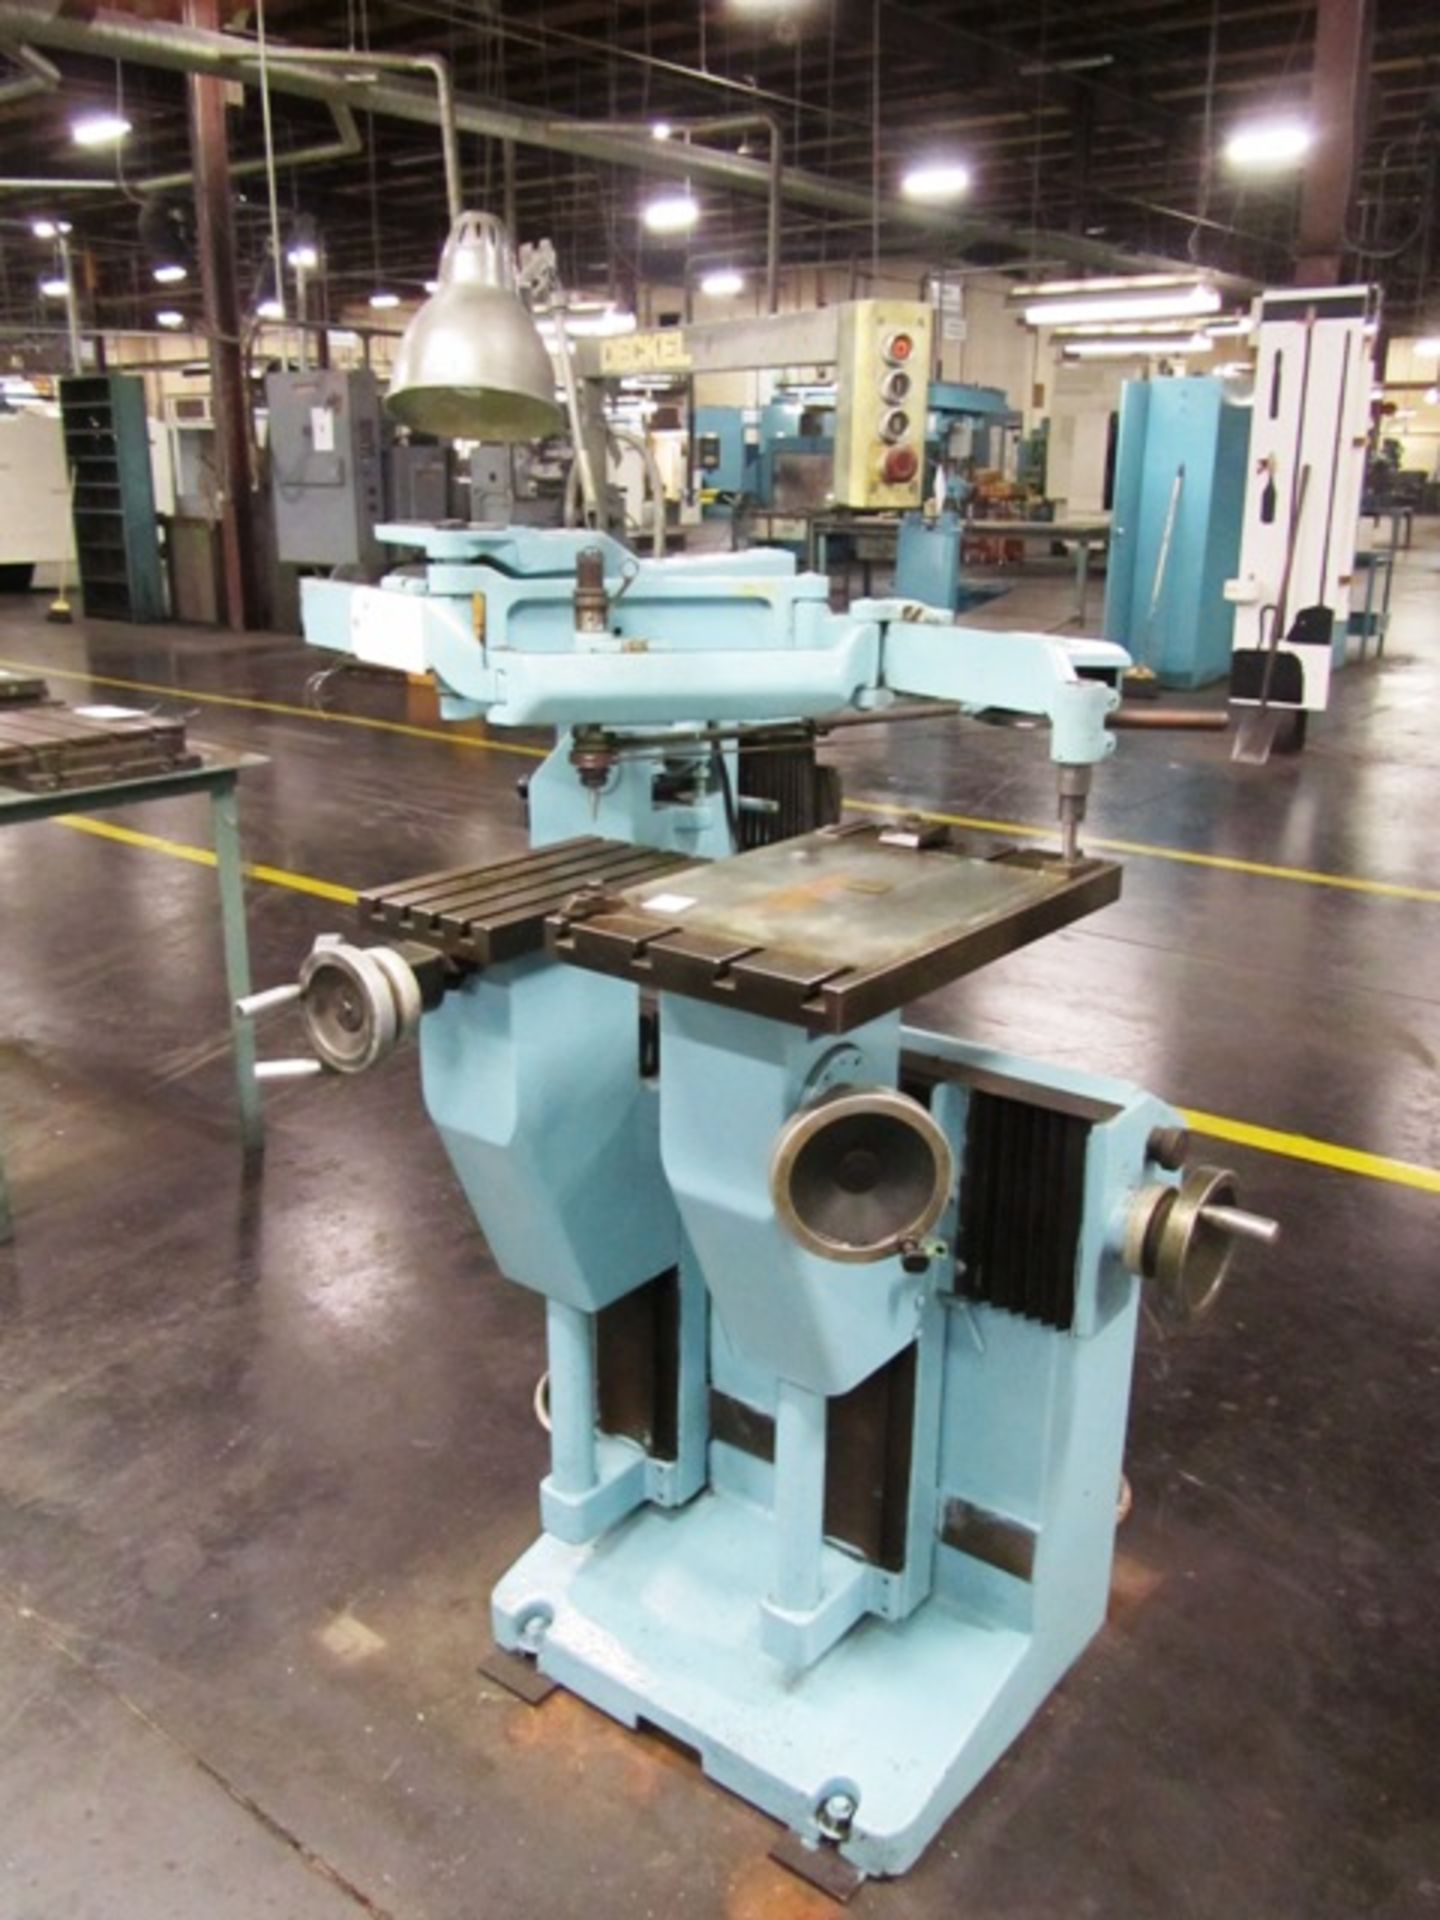 Friedrich Deckel GK21 Pantograph Tracing Mills with T-Slotted Duplicating Tables, sn:10350